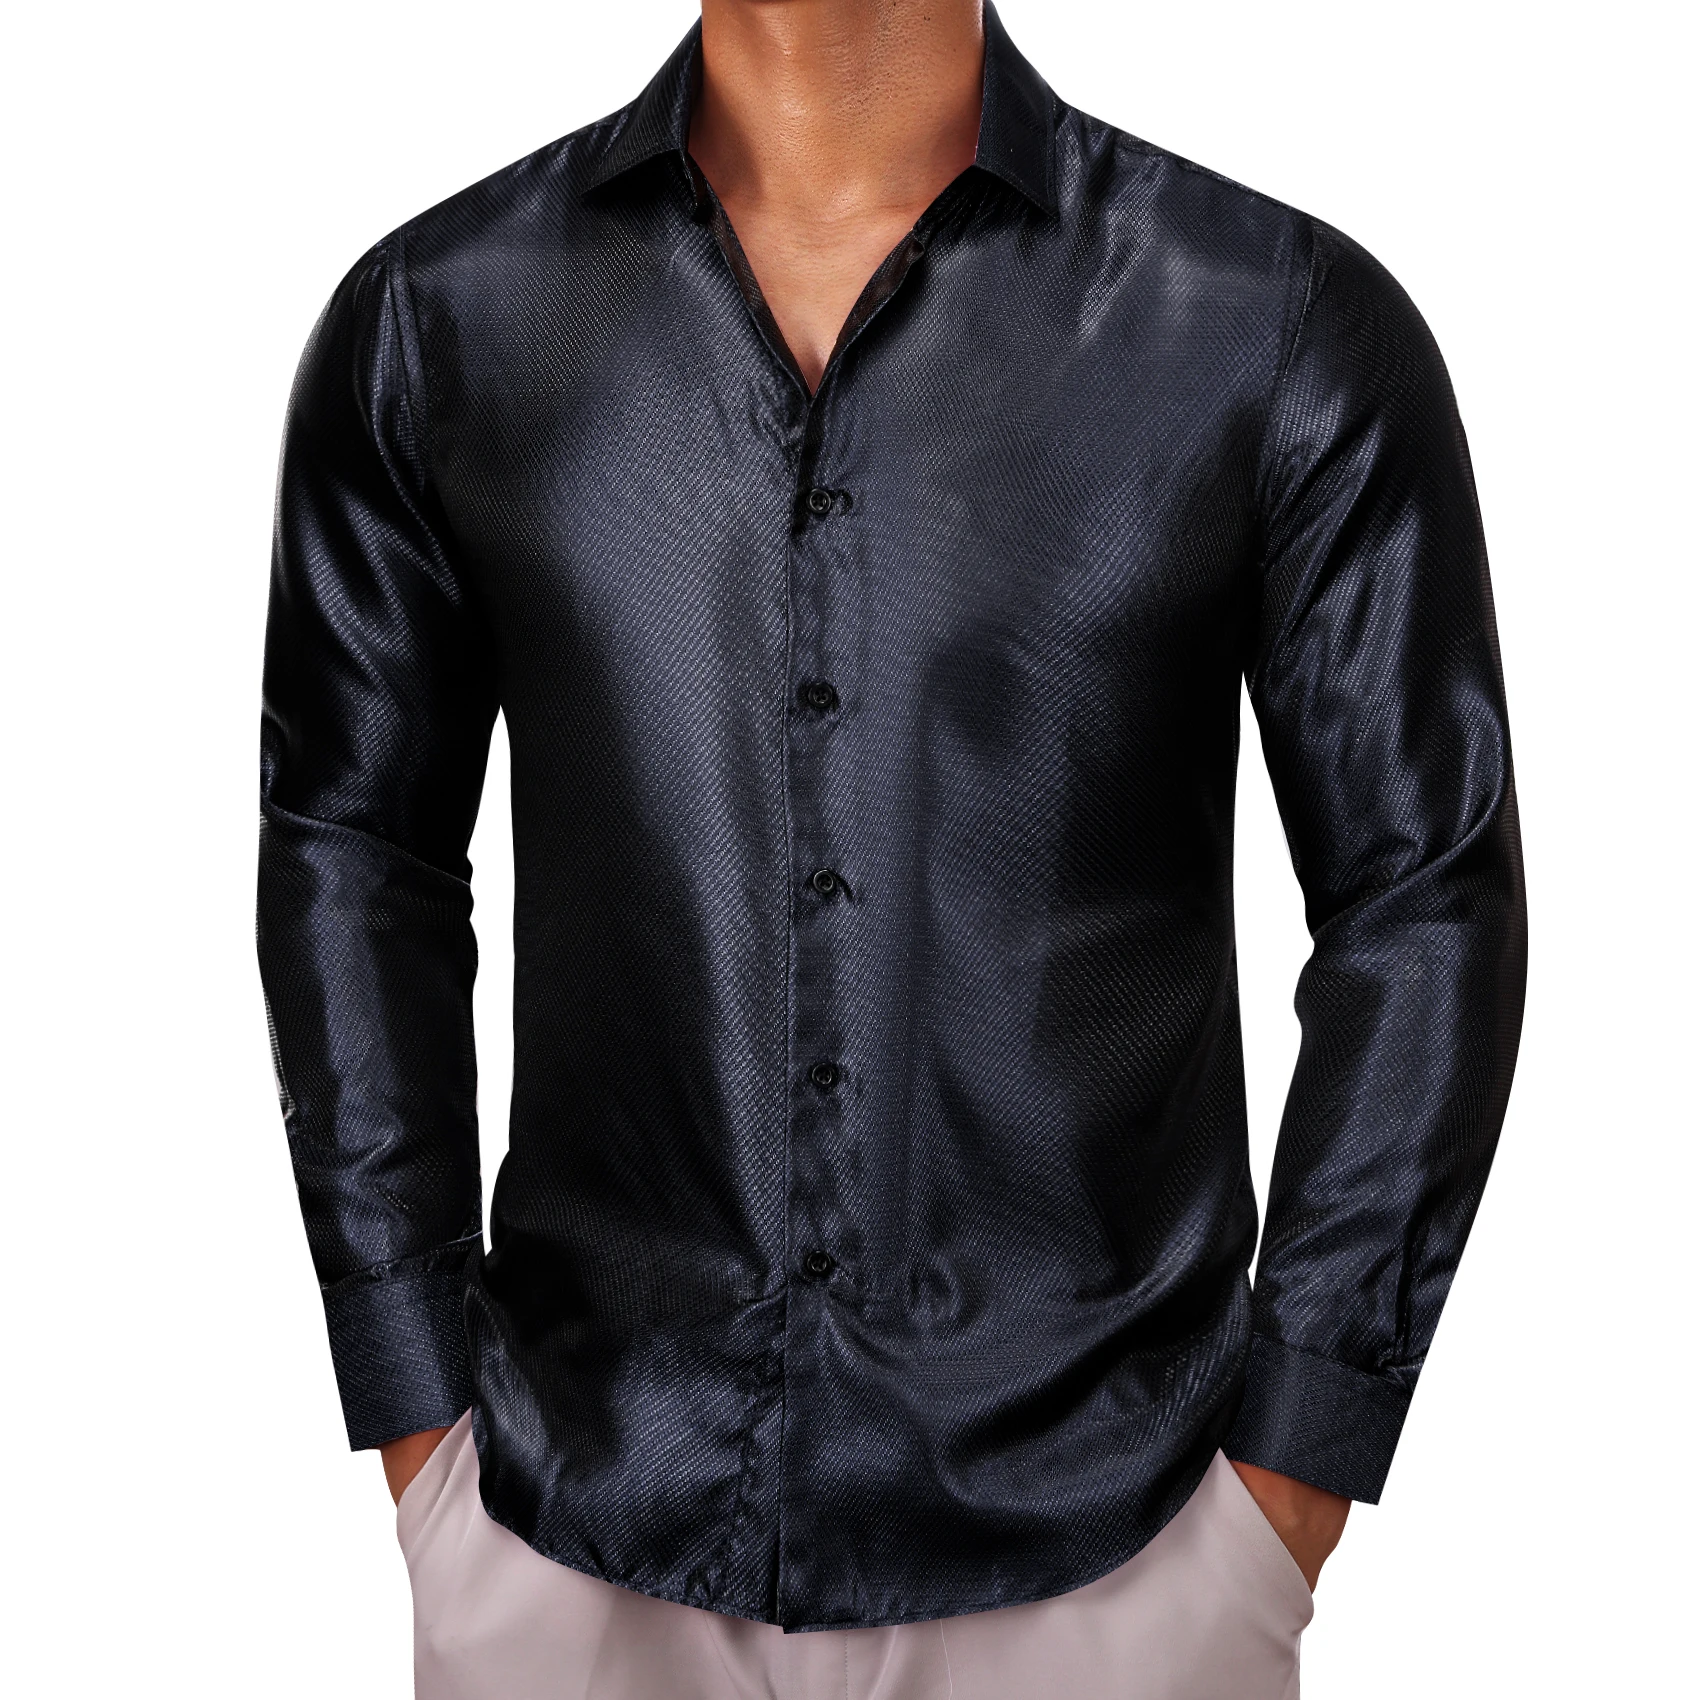 

Luxury Shirts for Men Silk Long Sleeve Black Solid Plain Slim Fit Male Blouses Turn Down Collar Tops Brtathable Barry Wang